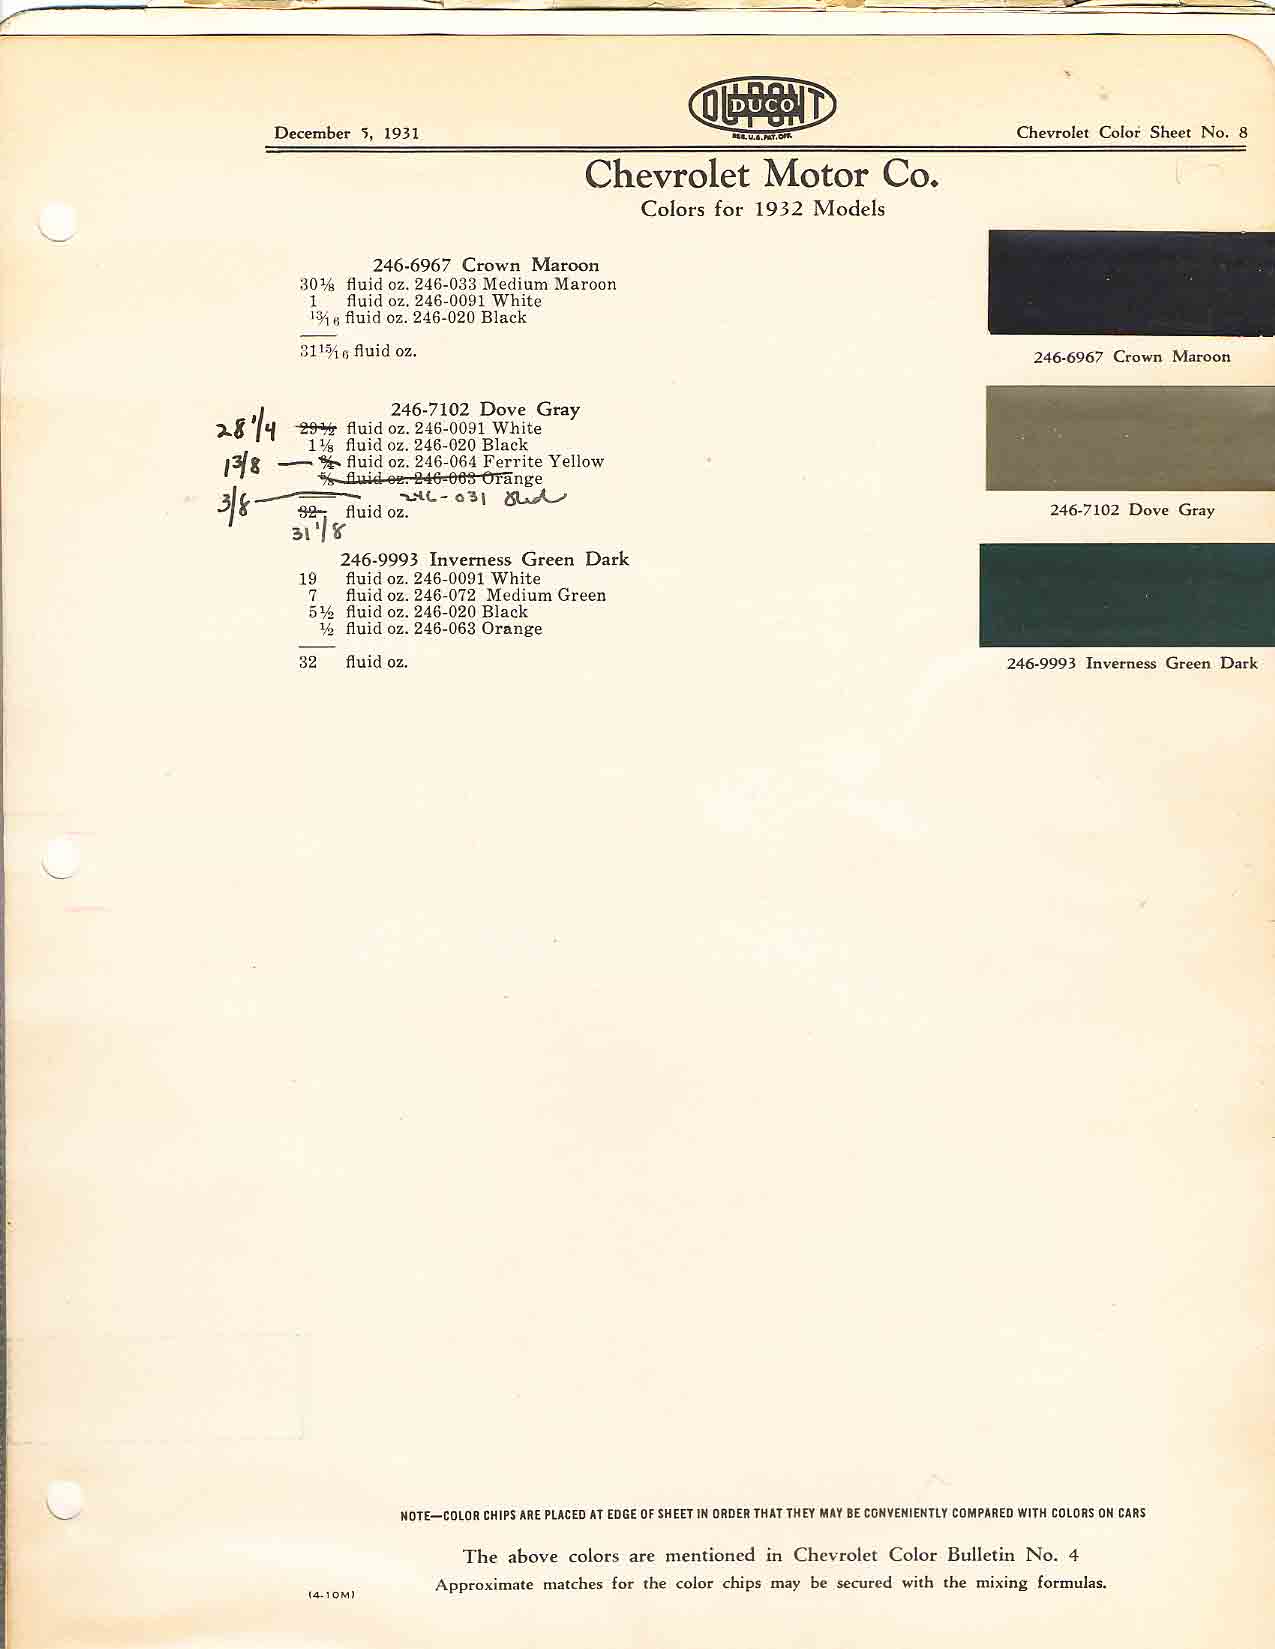 Colors and codes used on Chevrolet Vehicles in 1932